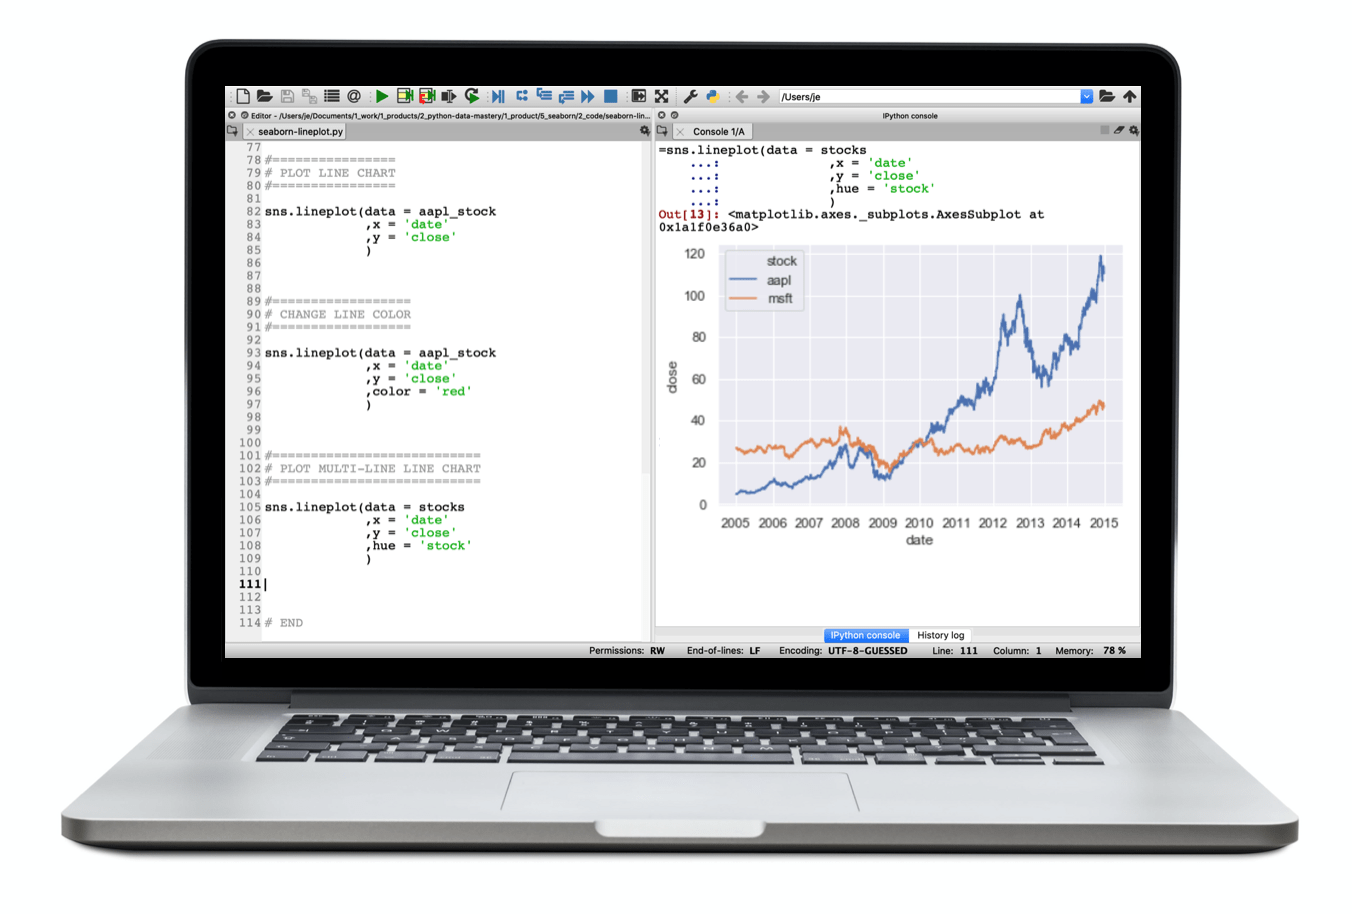 An image of a laptop with Seaborn code in an IDE, and a corresponding line chart.